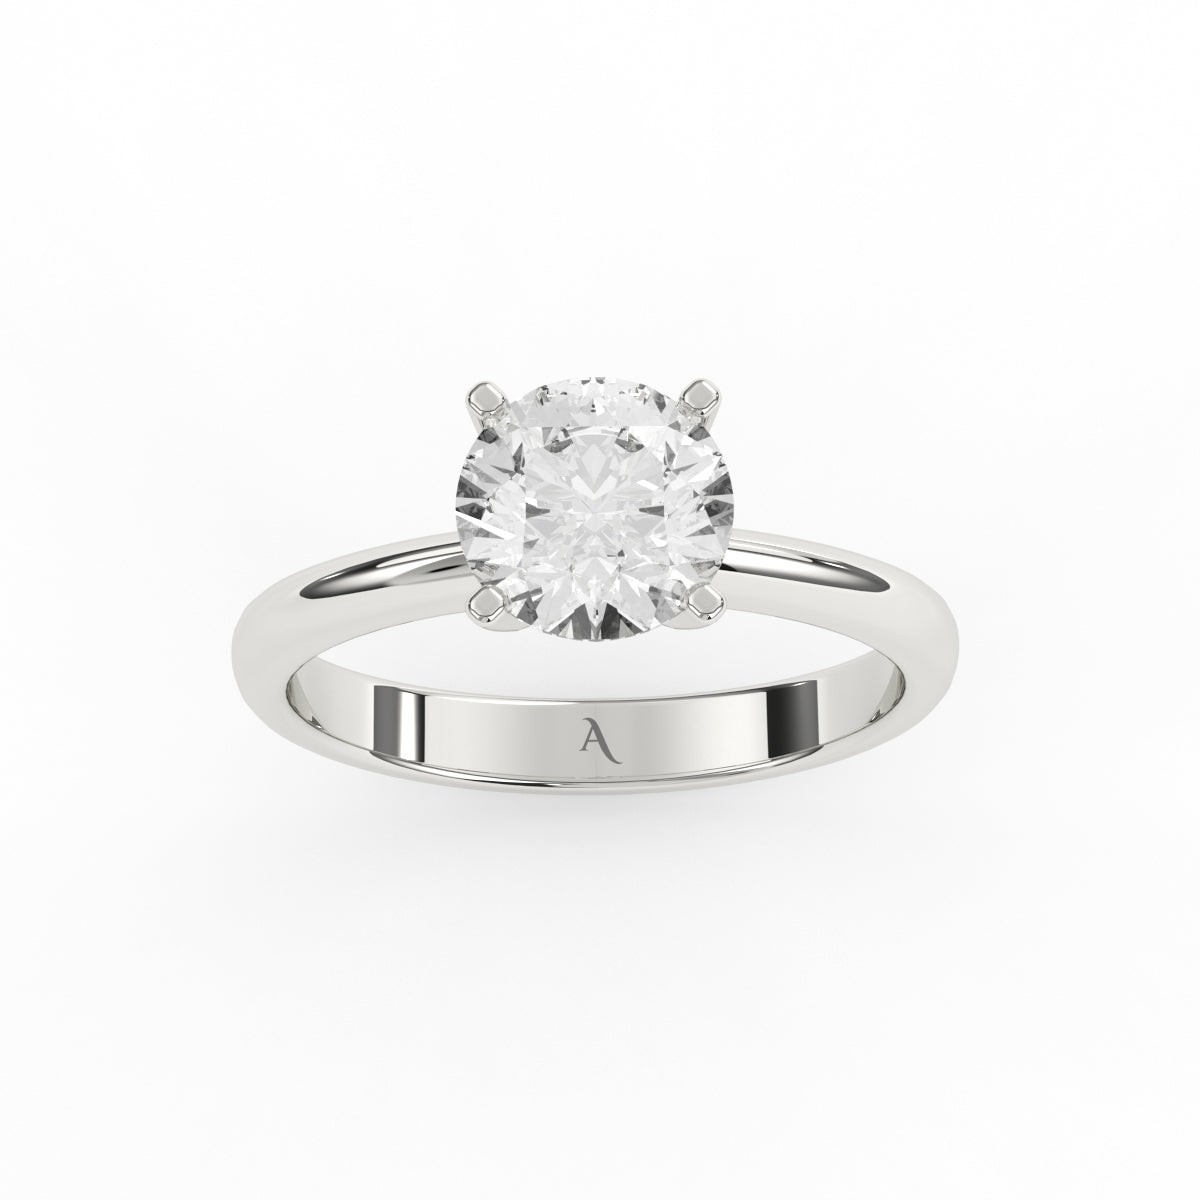 Everyday solitaire ring